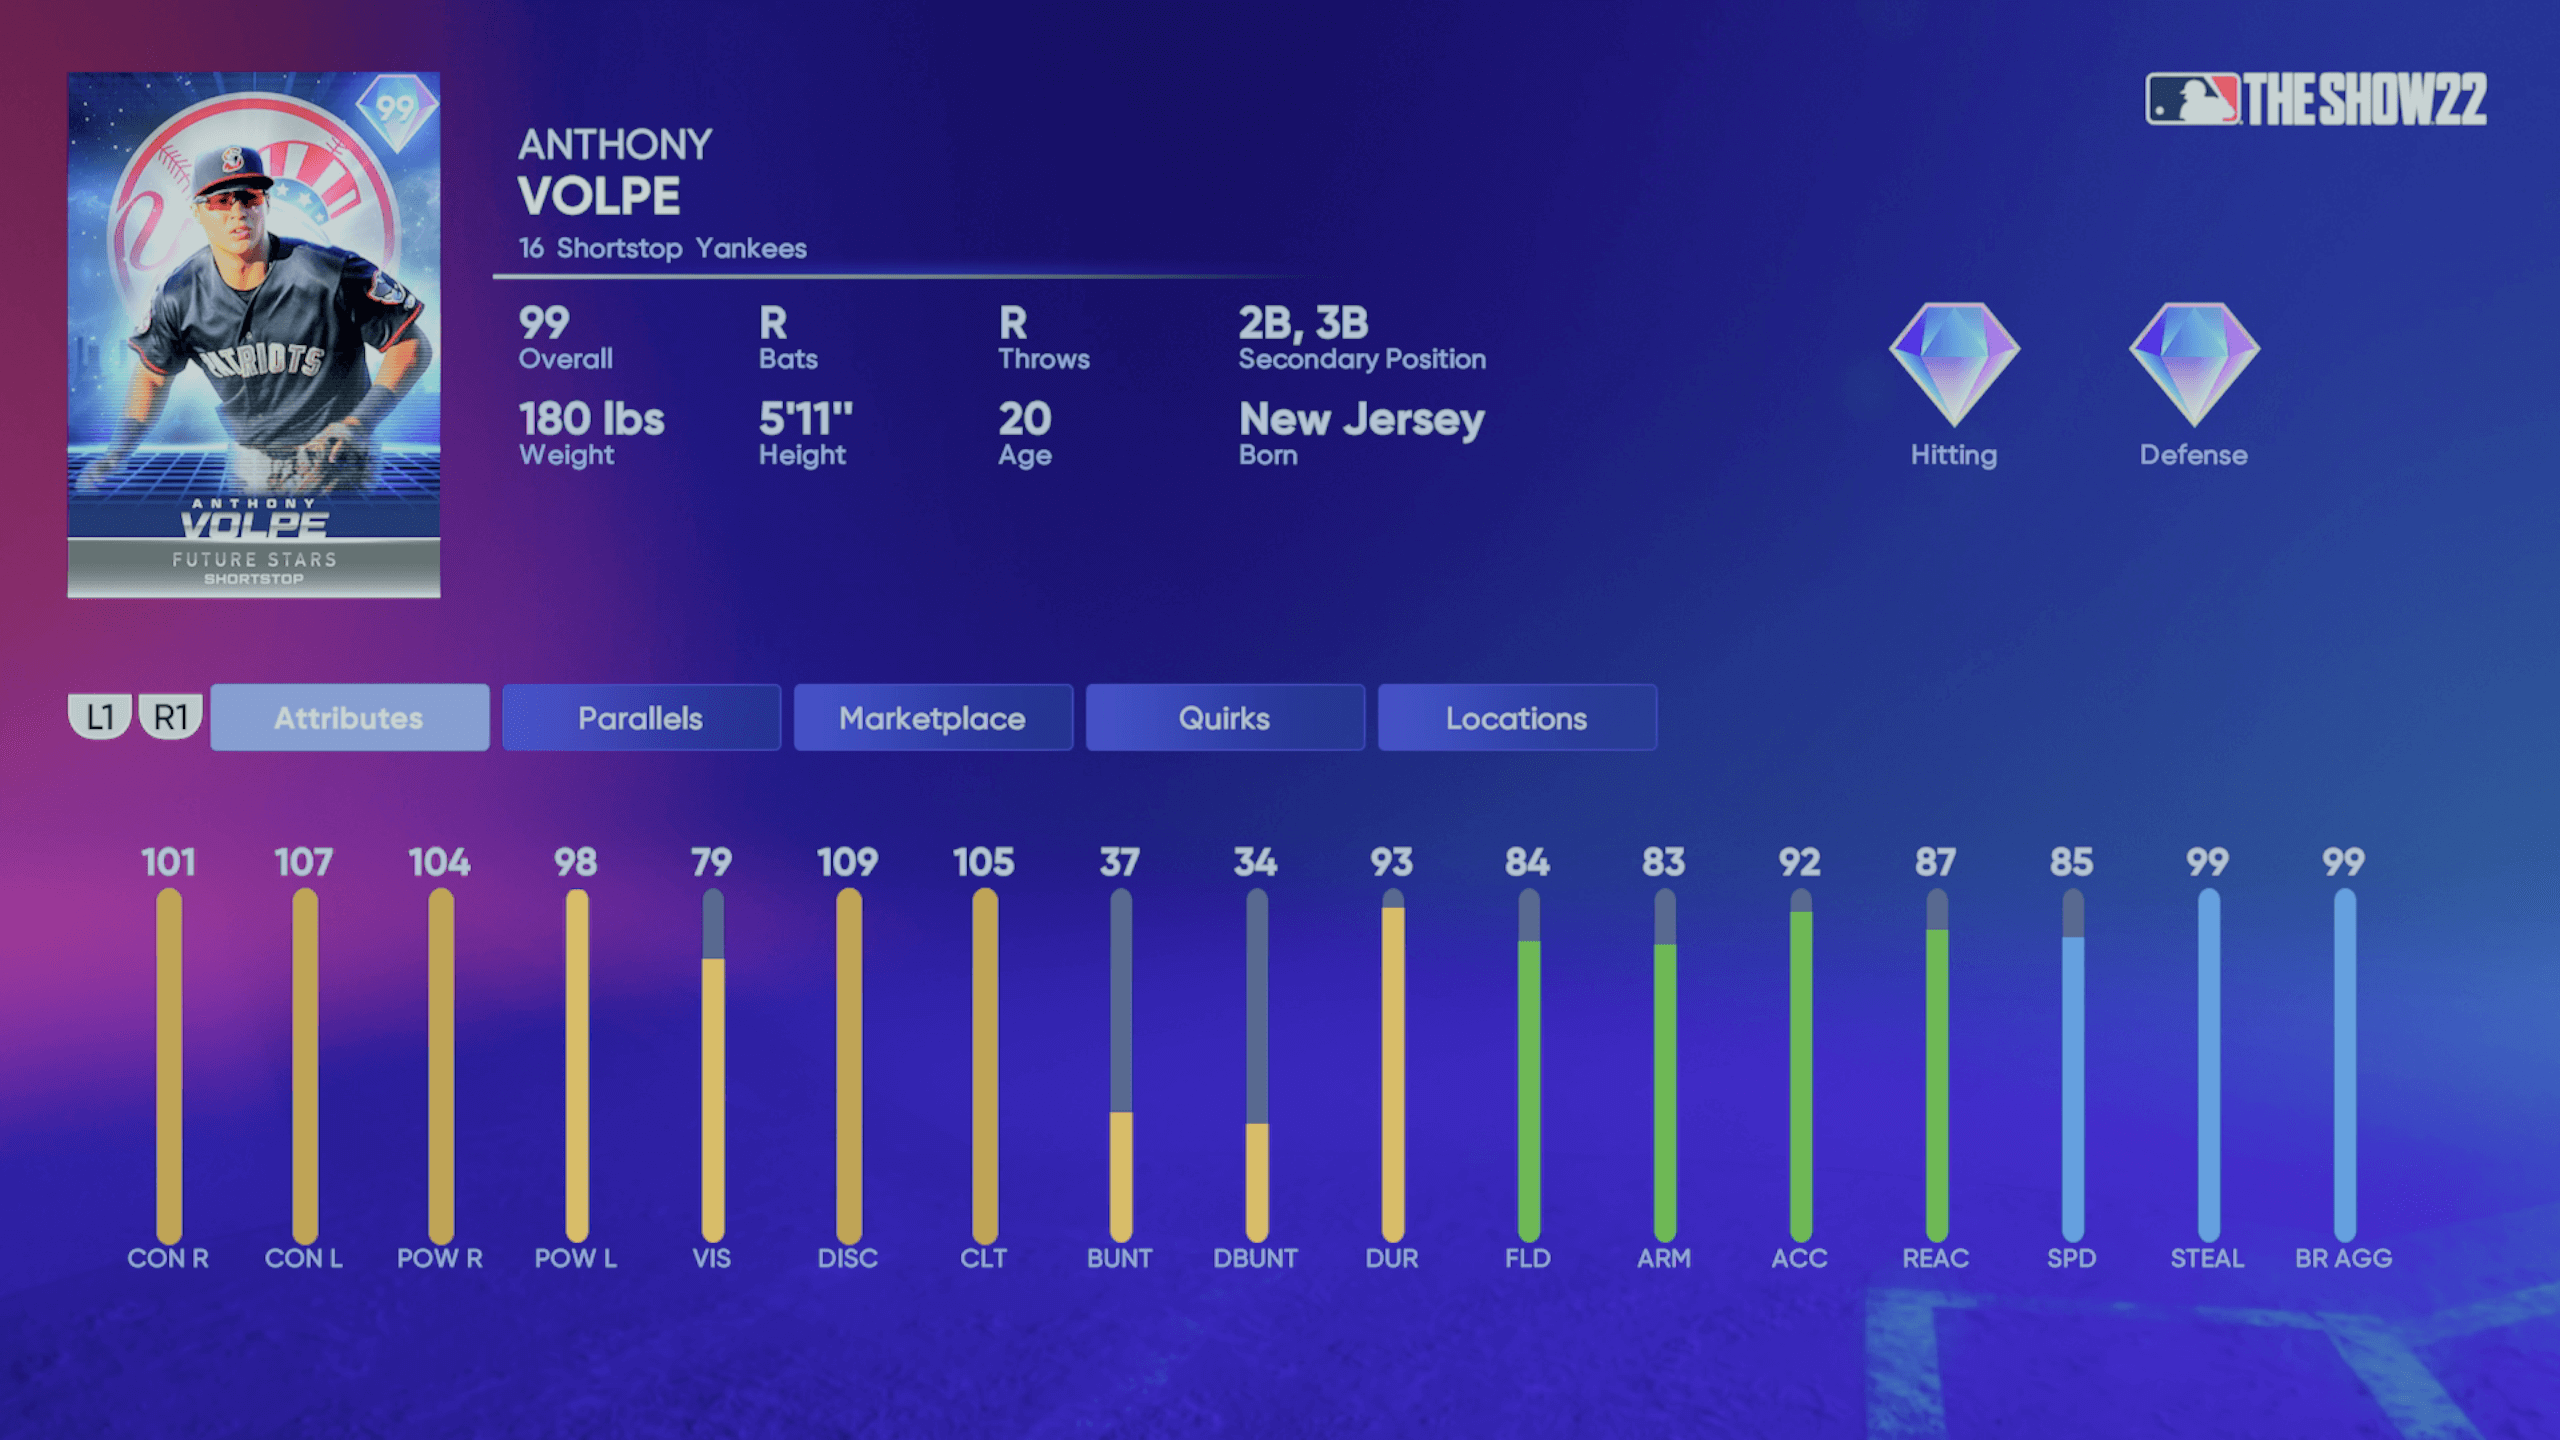 Amazing MLB stat lines from 2020